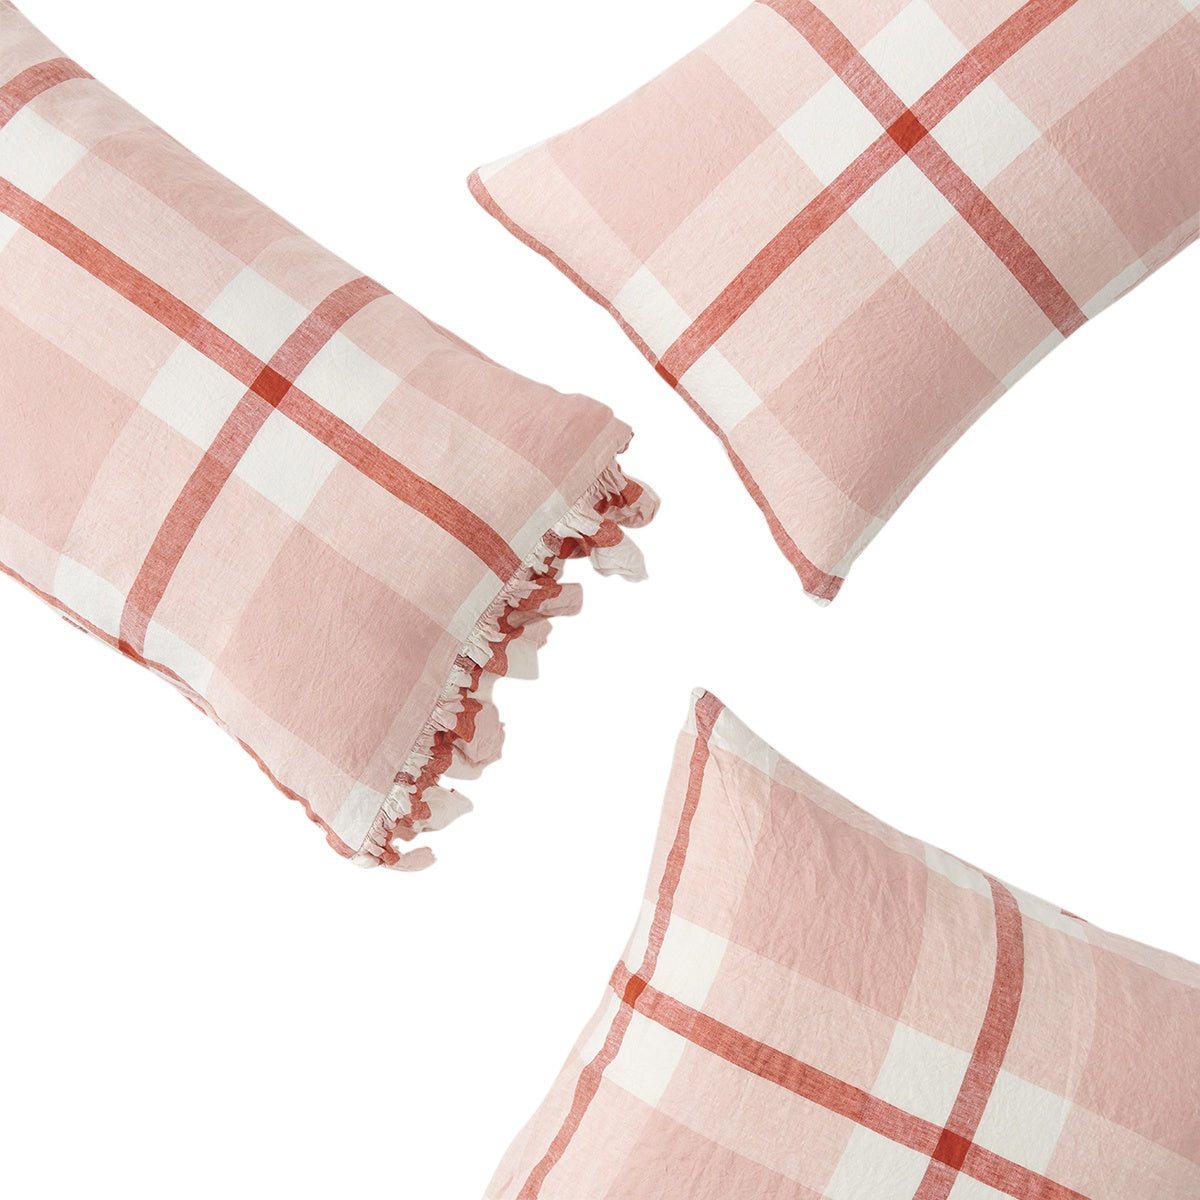 SOW floss check linen pillowcases with ruffle